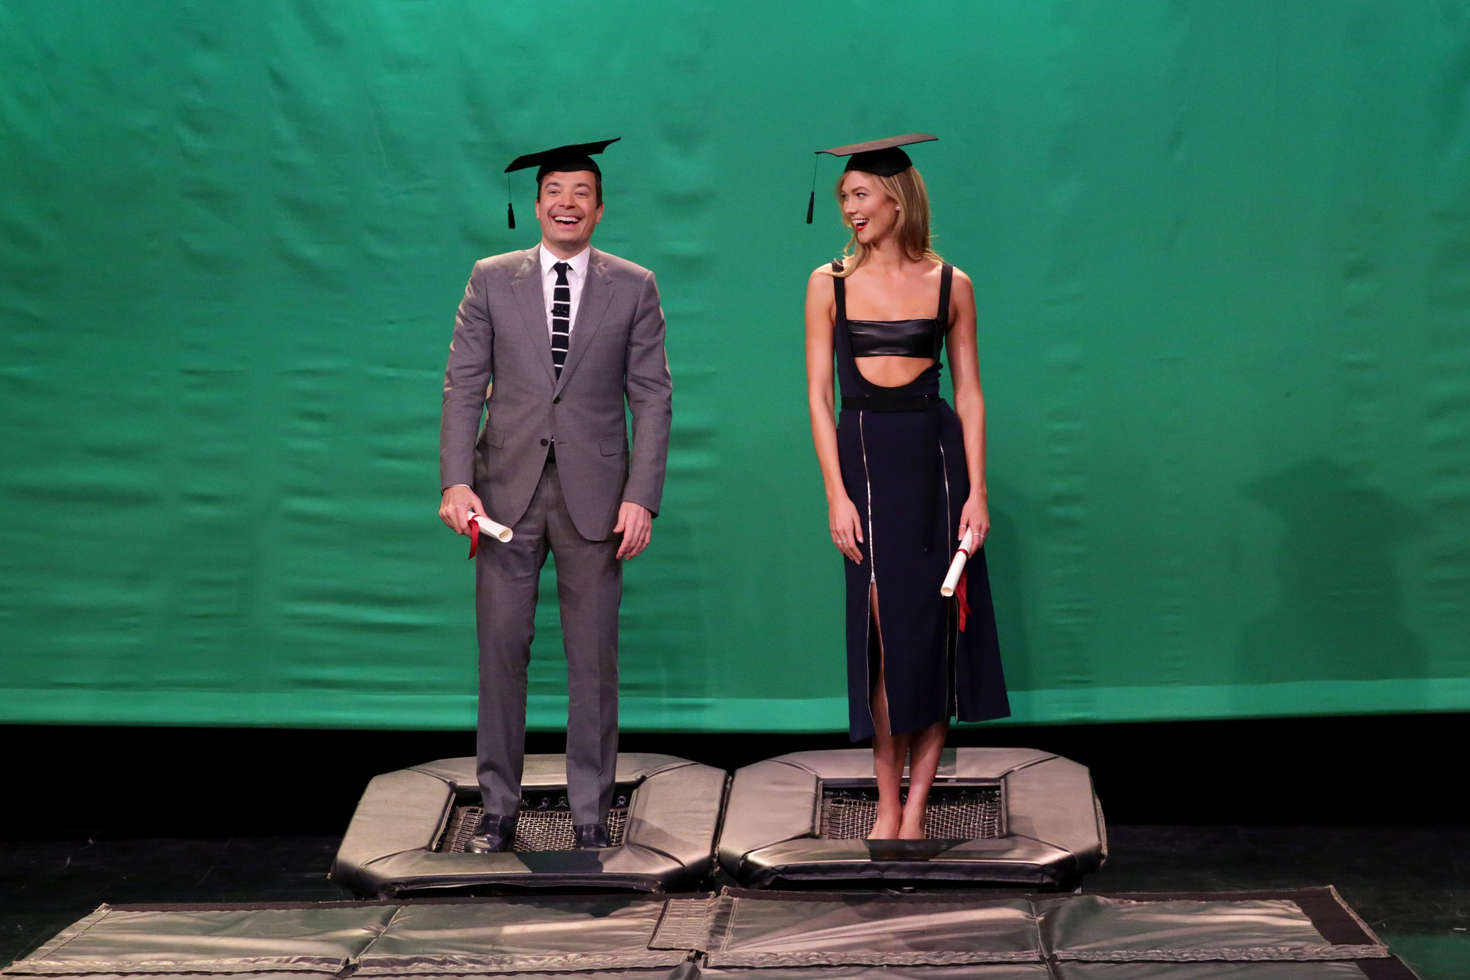 Karlie Kloss on â€˜The Tonight Show Starring Jimmy Fallonâ€™ in NY